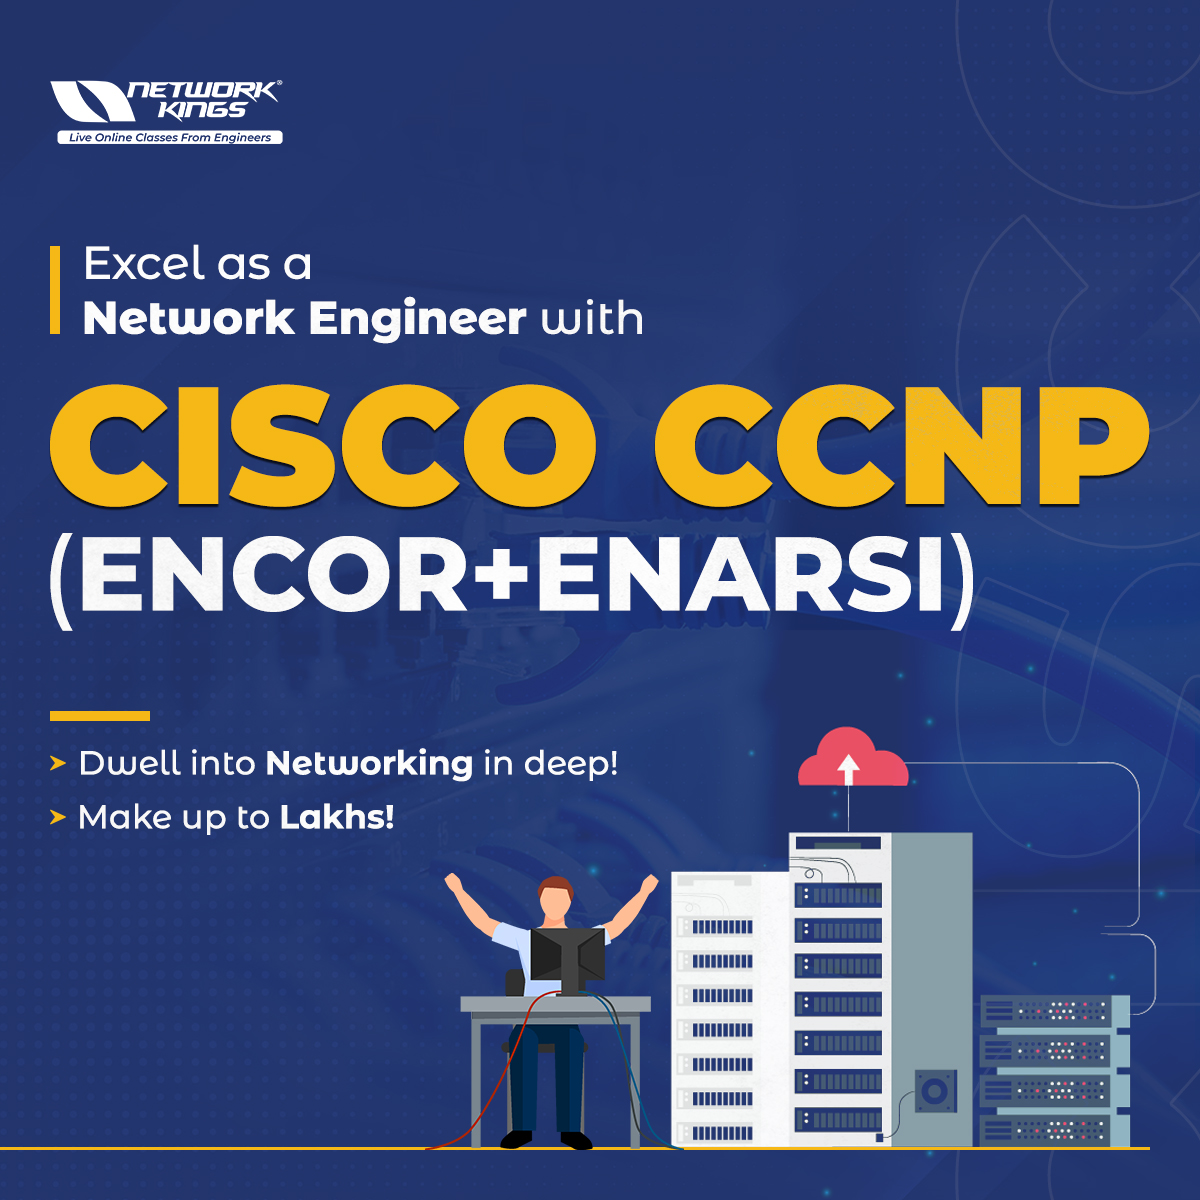 Best CCNP Training with Certification (Enterprise)